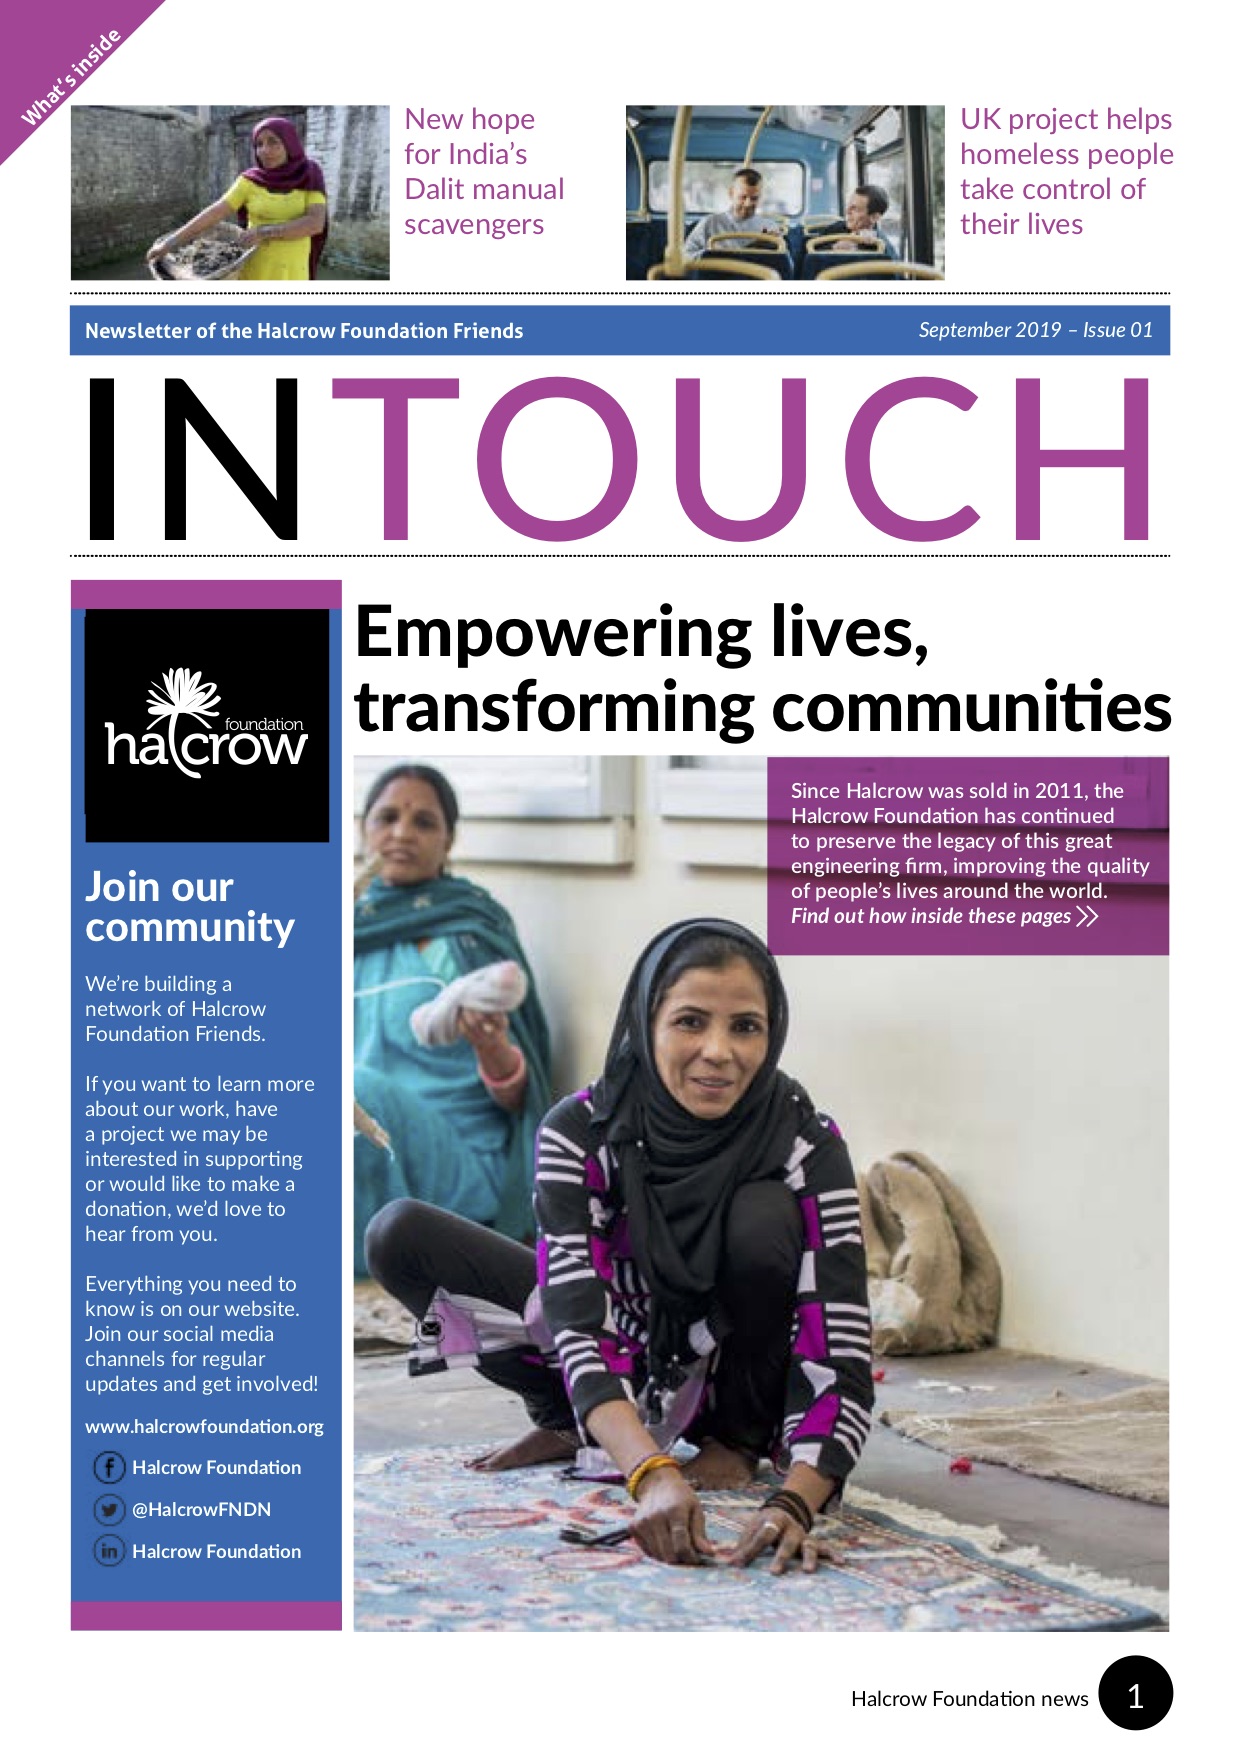 Halcrow Foundation In Touch newsletter